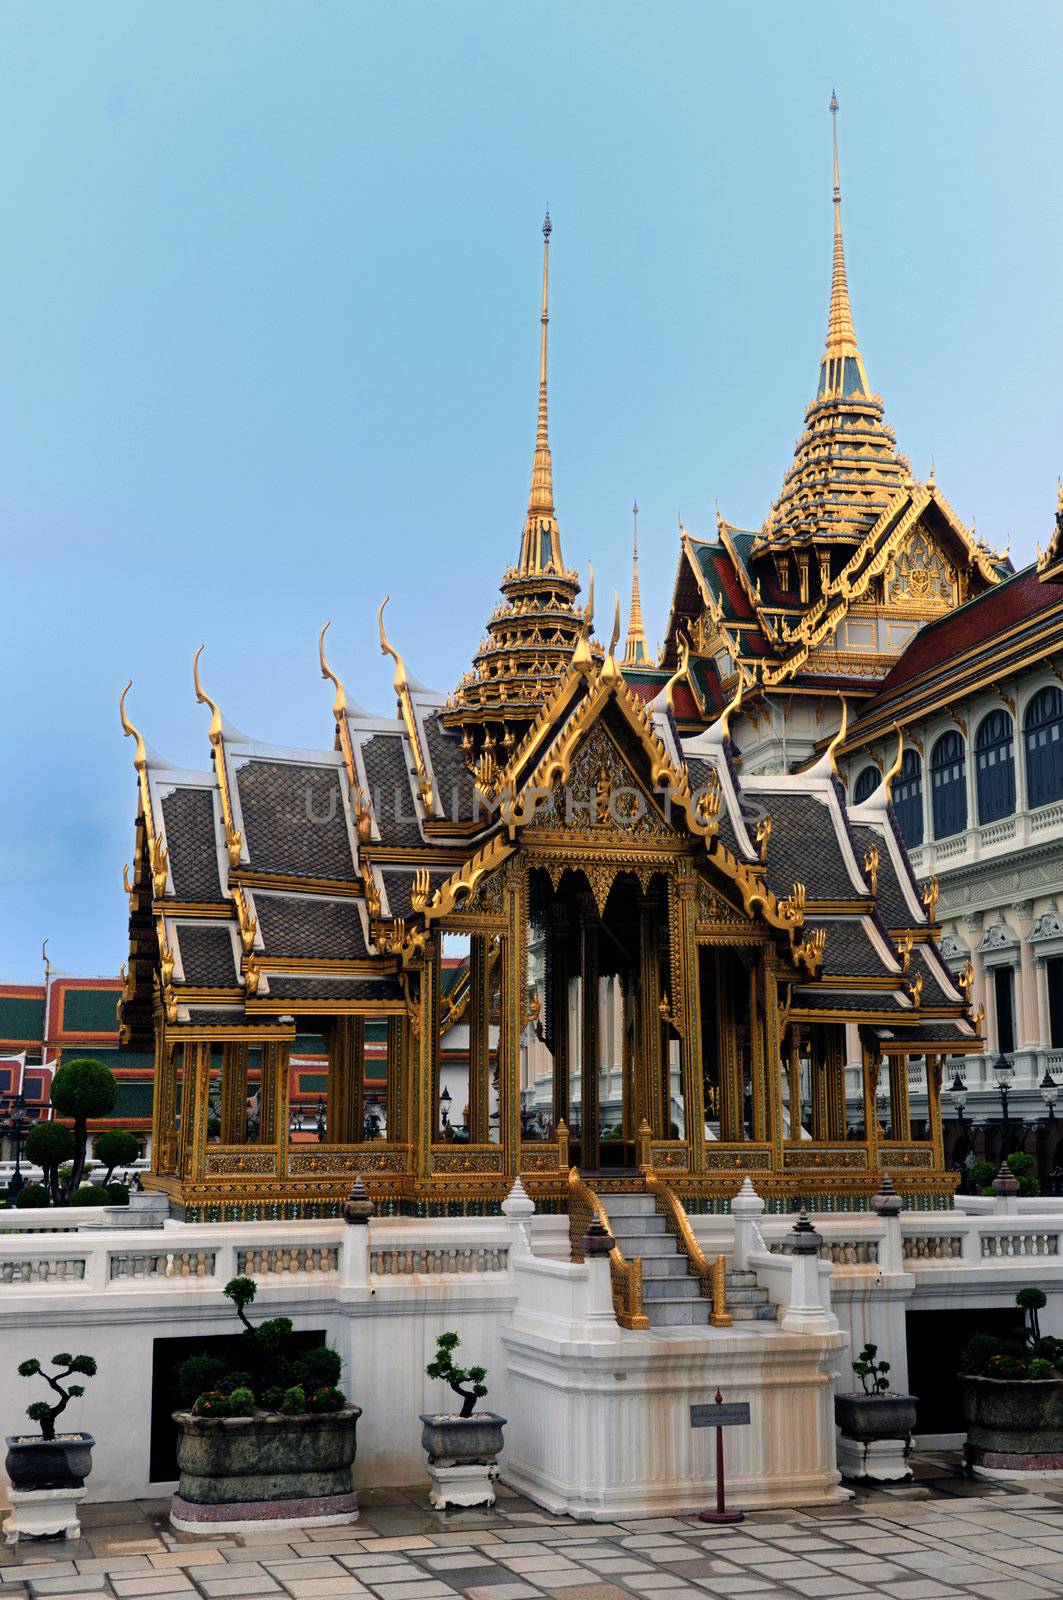 A thai temple in the grand palace area